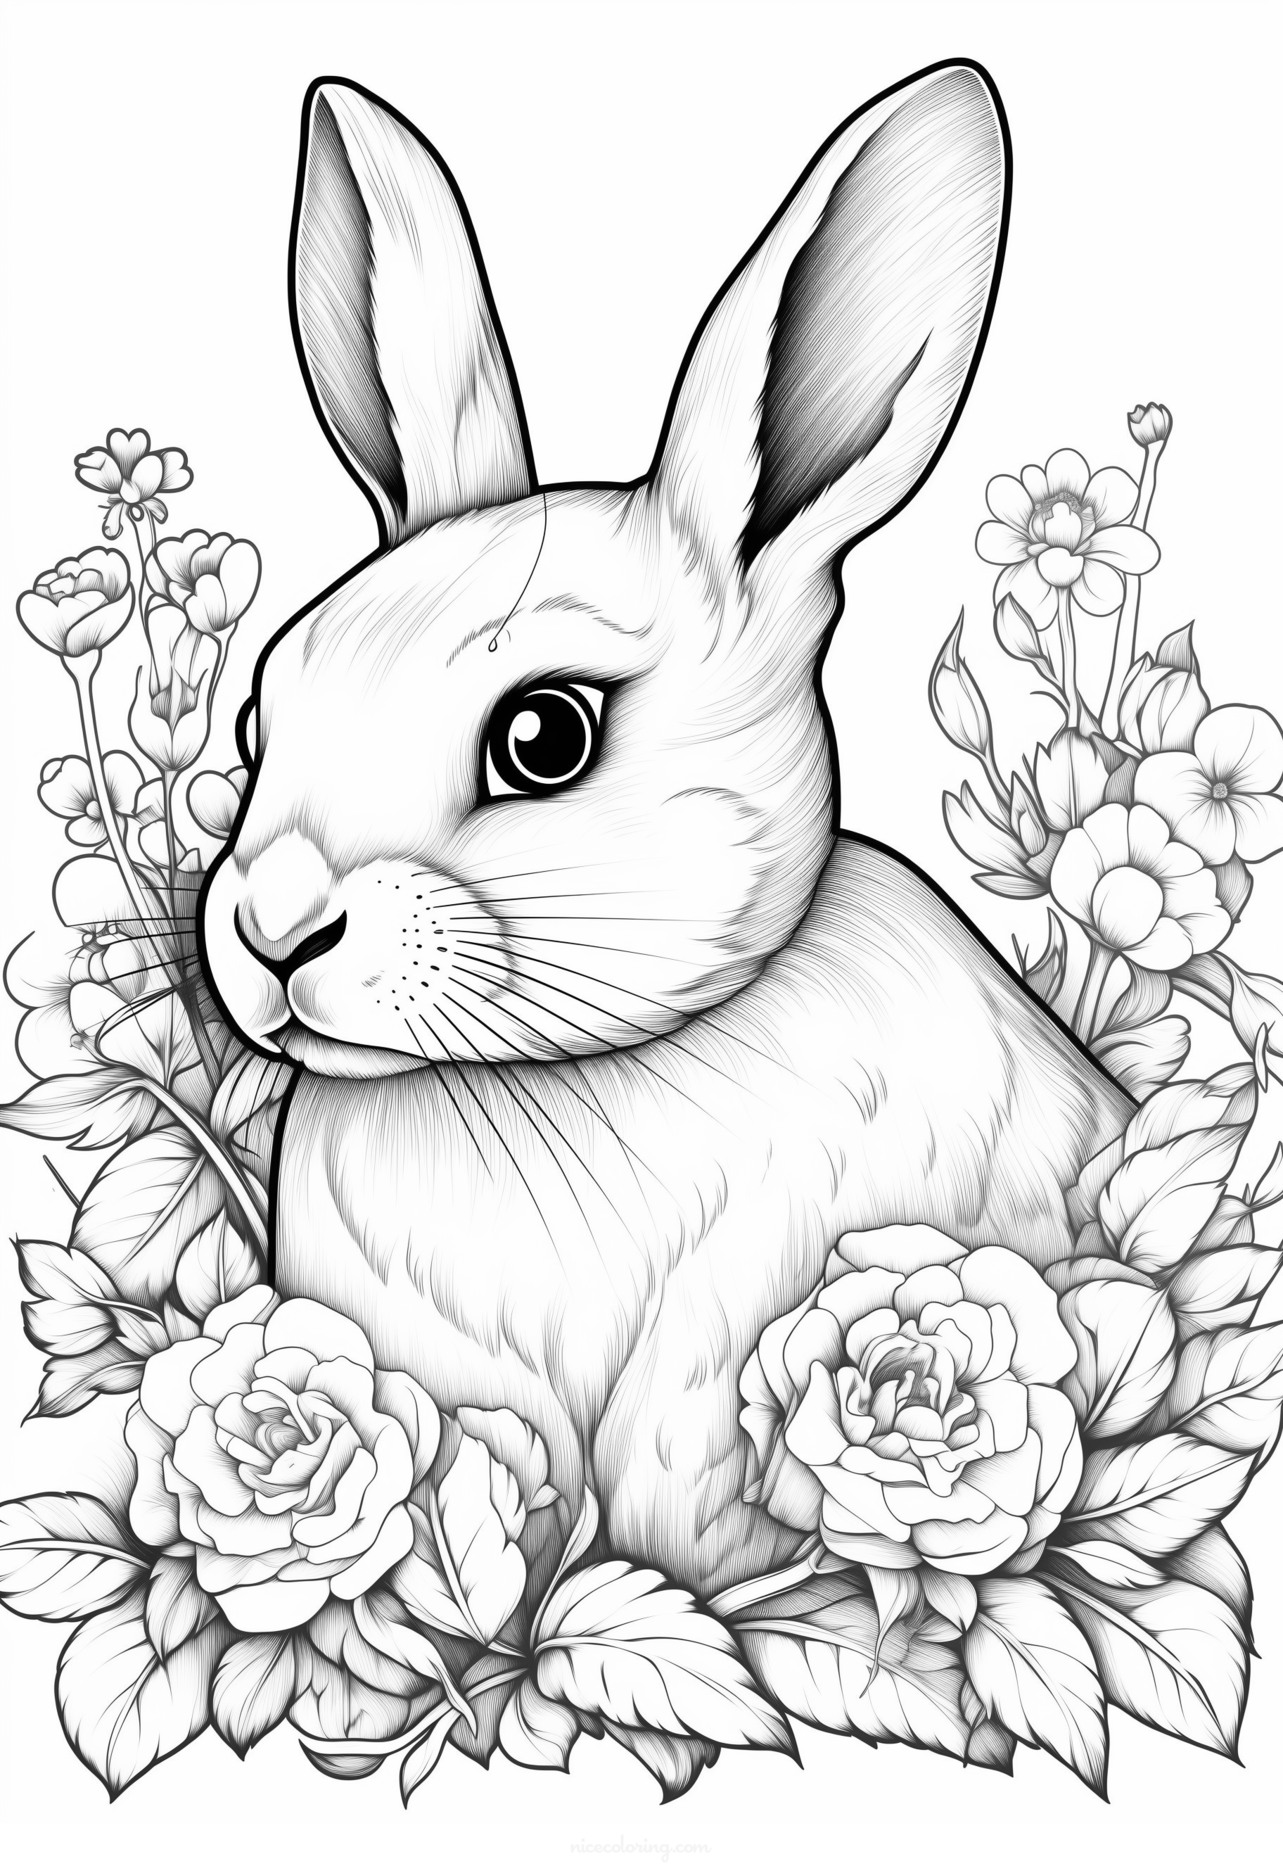 Rabbit sitting in the grass coloring page